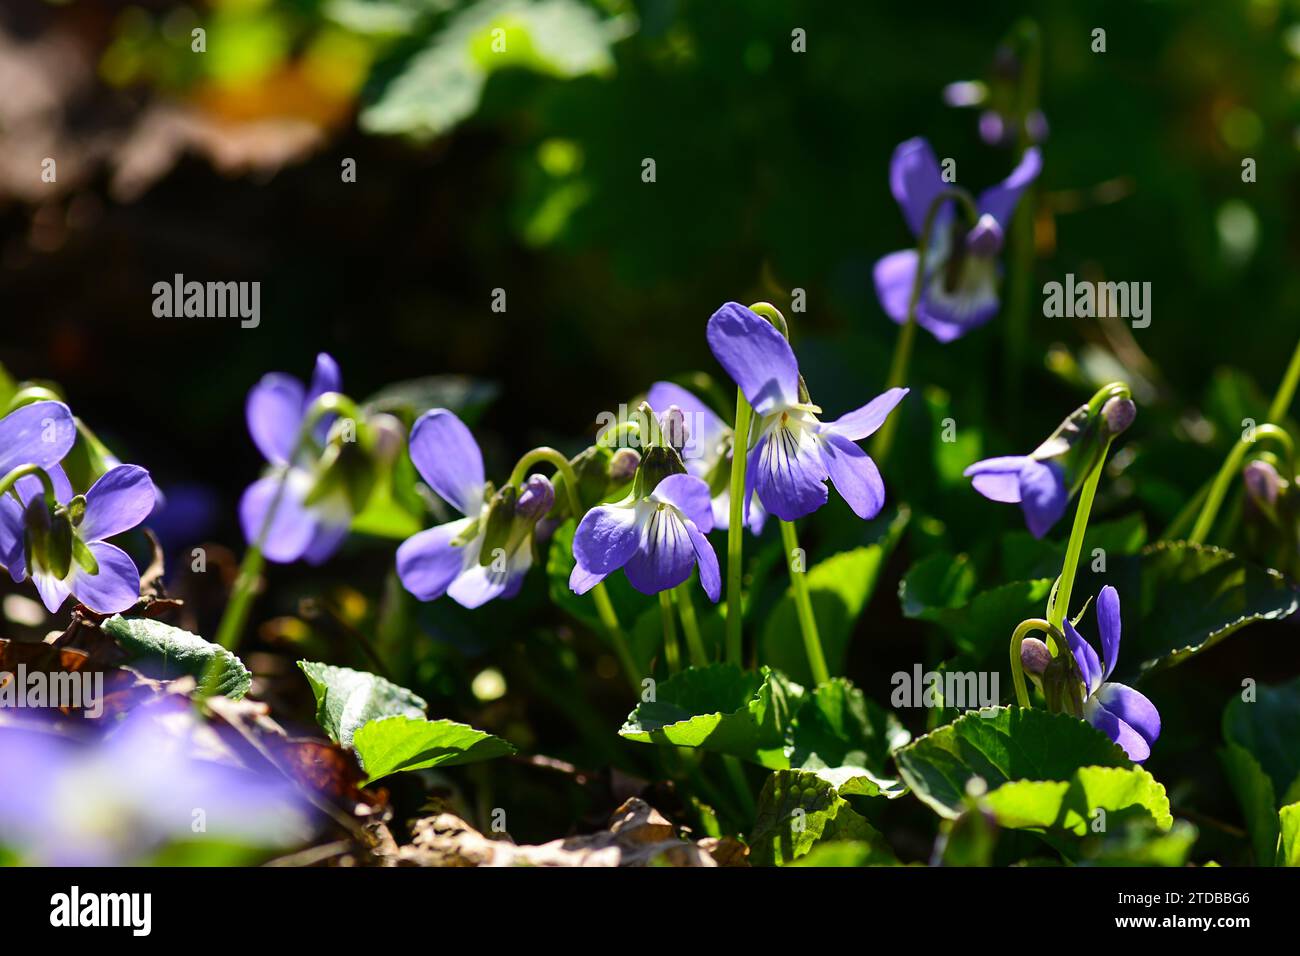 Forest clearing with Common violets (Viola collina) flowers in bloom, s, flower background . selective focus Stock Photo